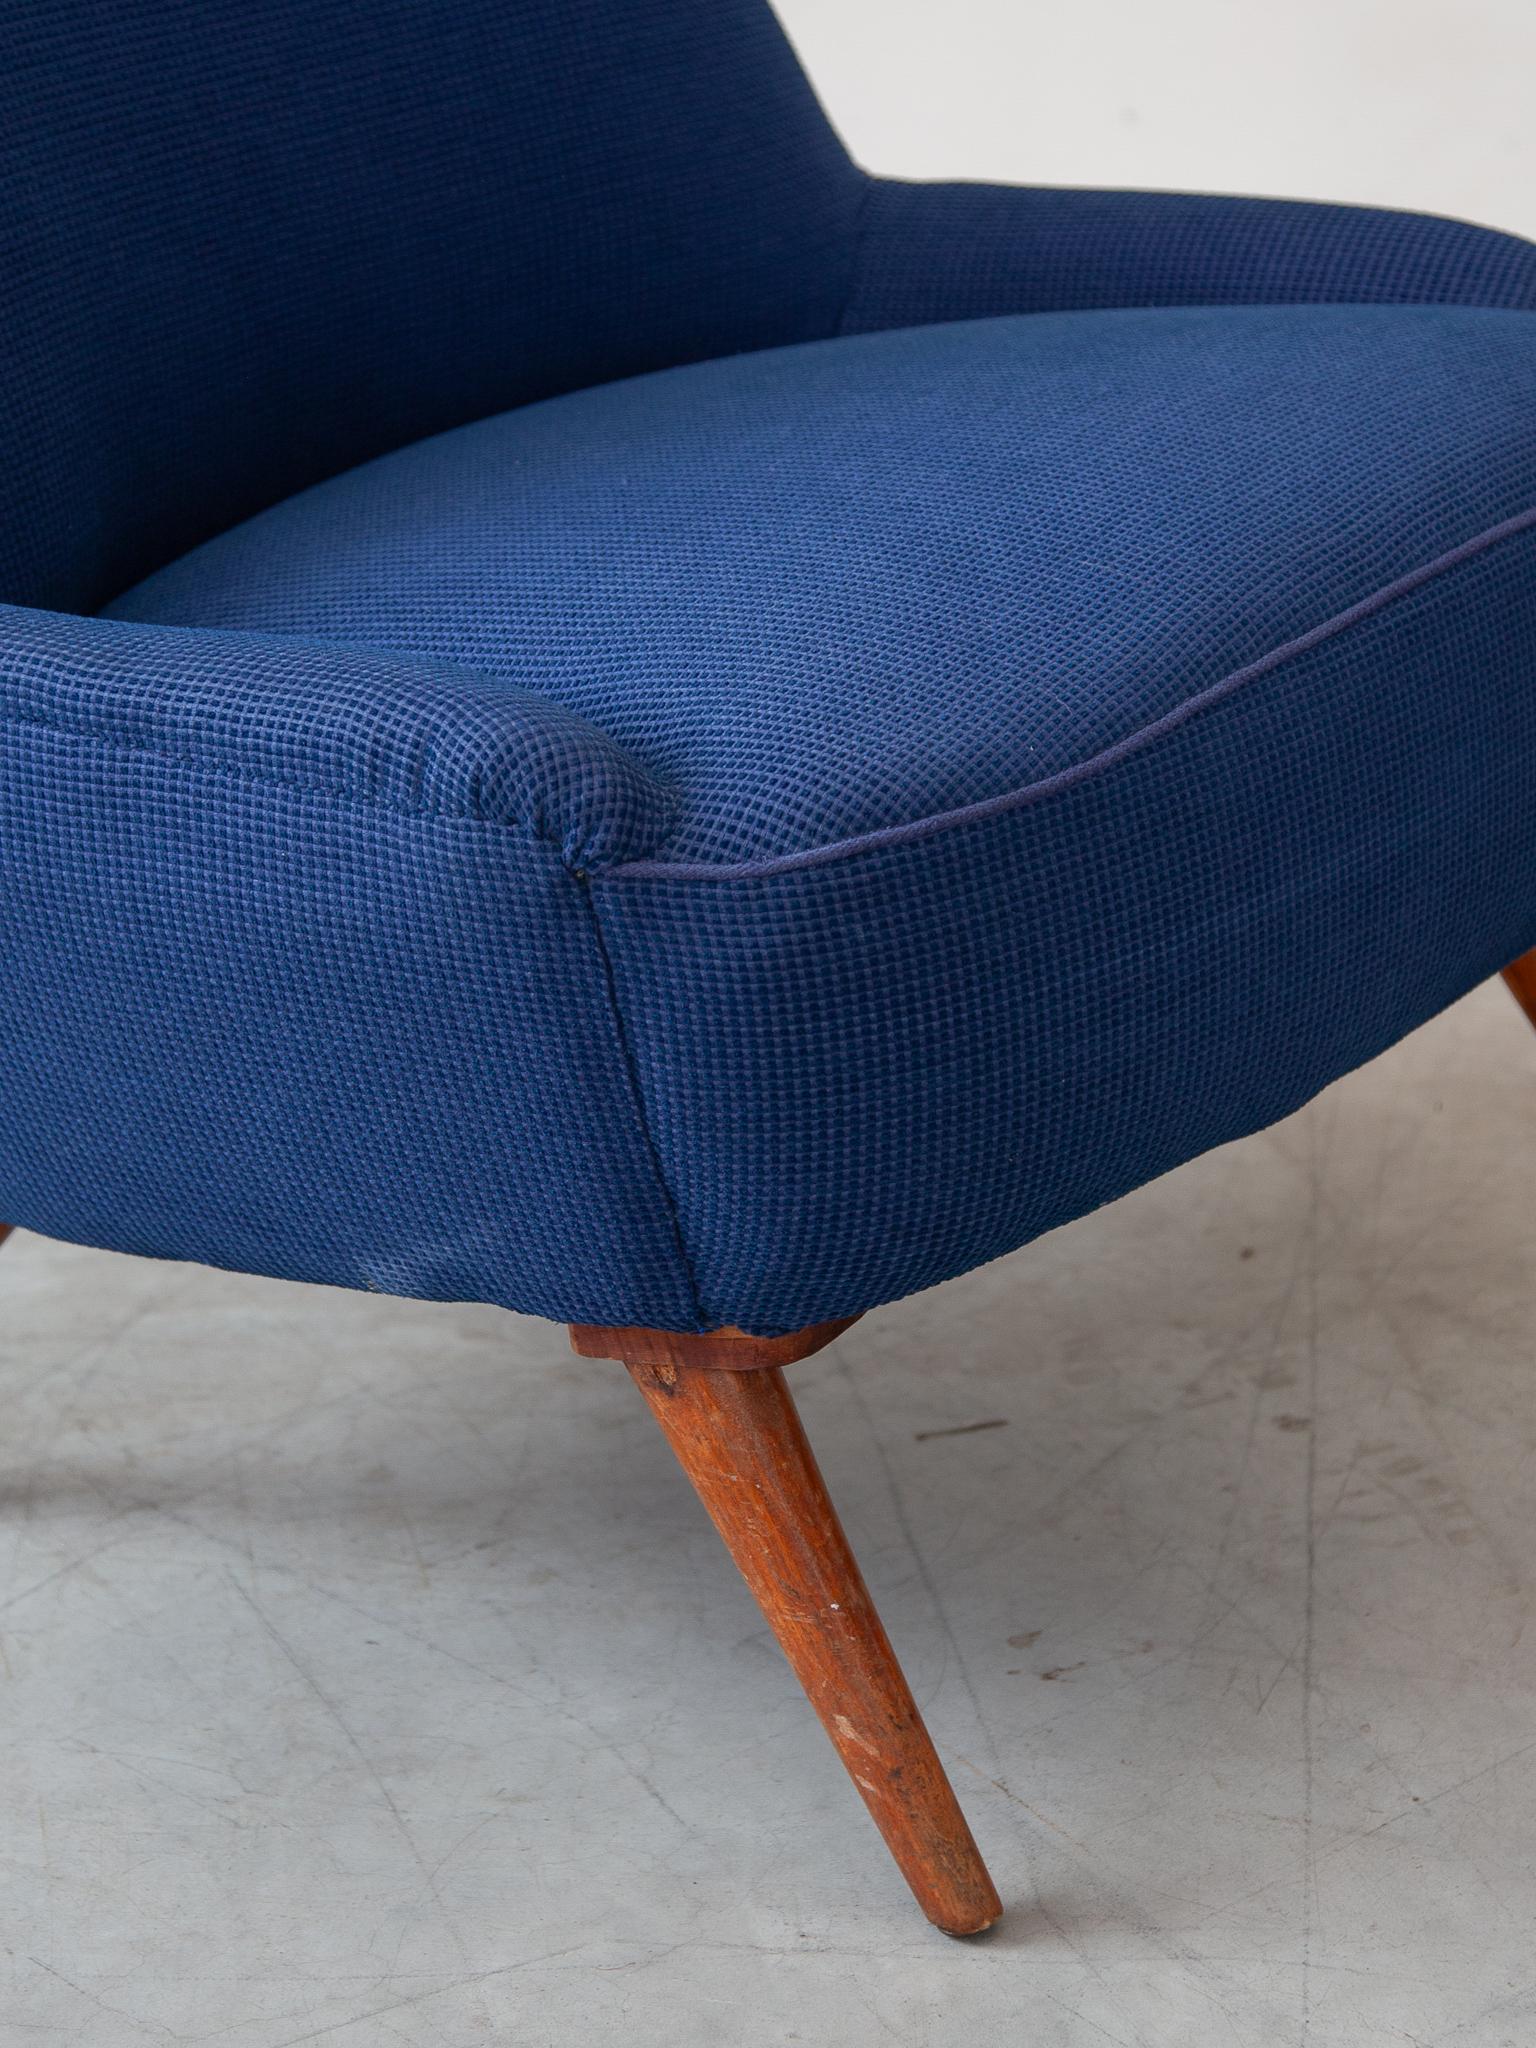 Upholstery Midcentury Modern 1950s Blue Fabric, Lounge Arm Chair, Scandinavian Design For Sale